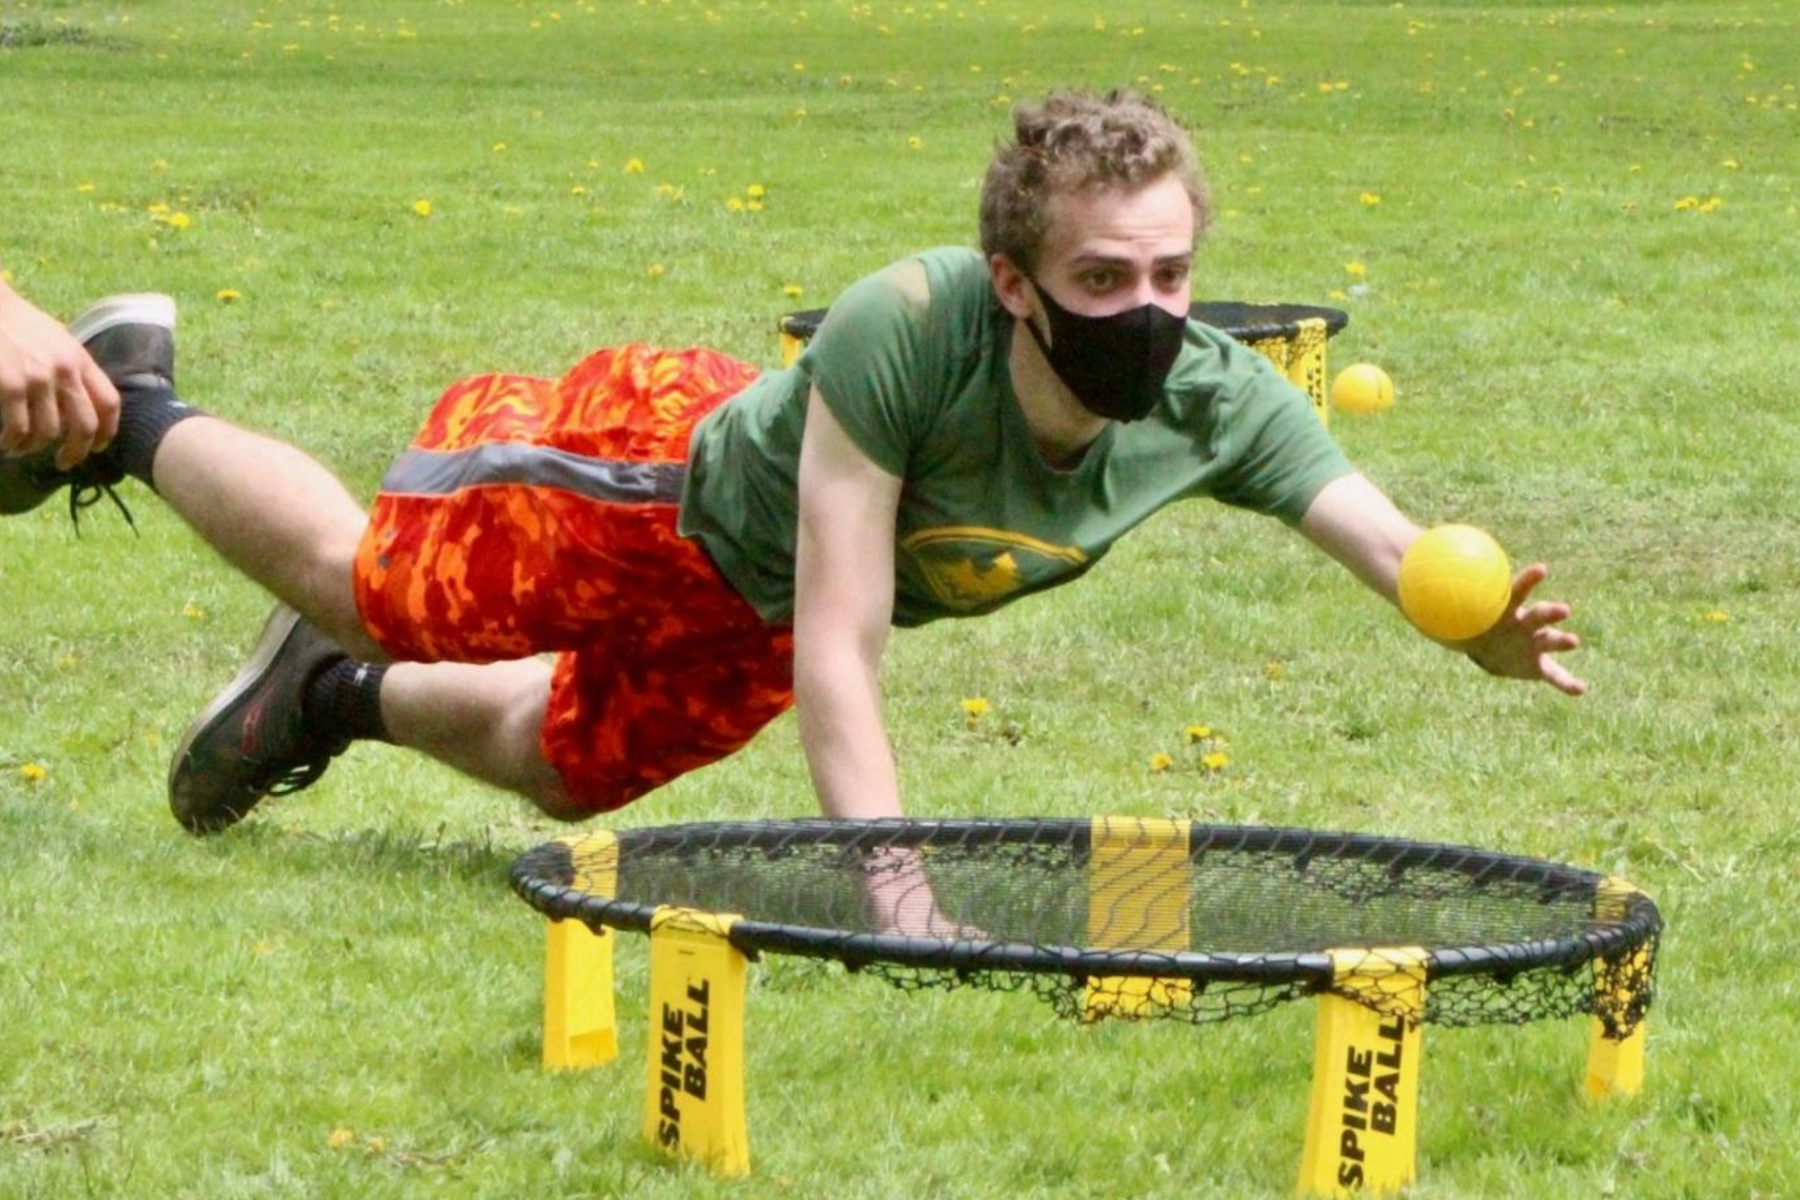 A person playing Spikeball catches the ball